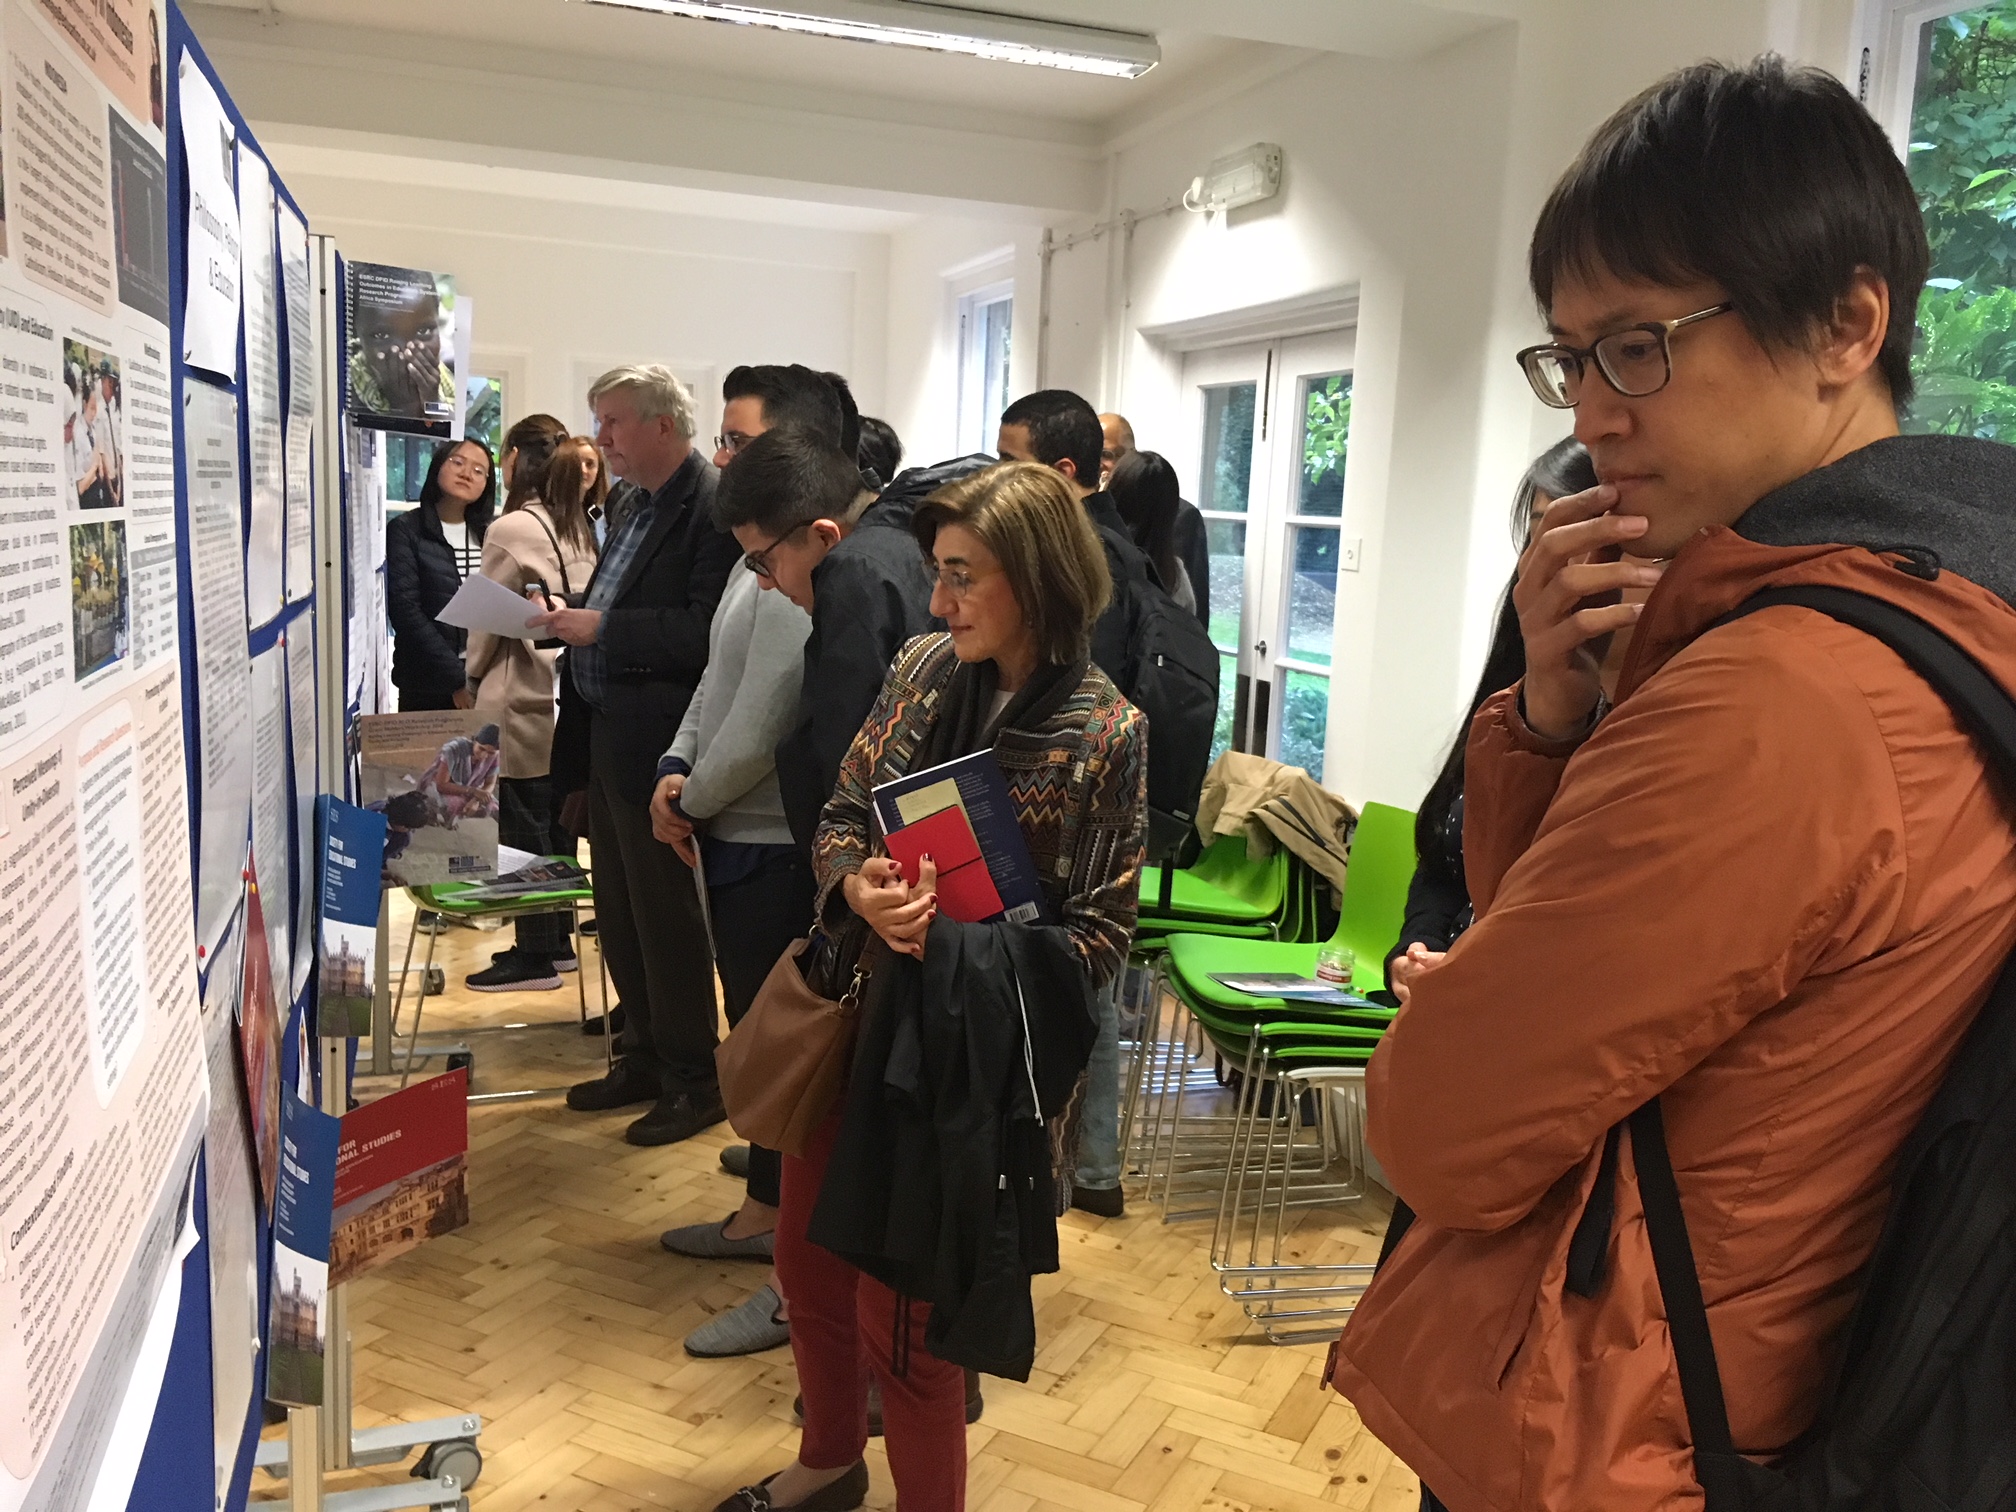 Attendees at the 2018 Research Poster Conference